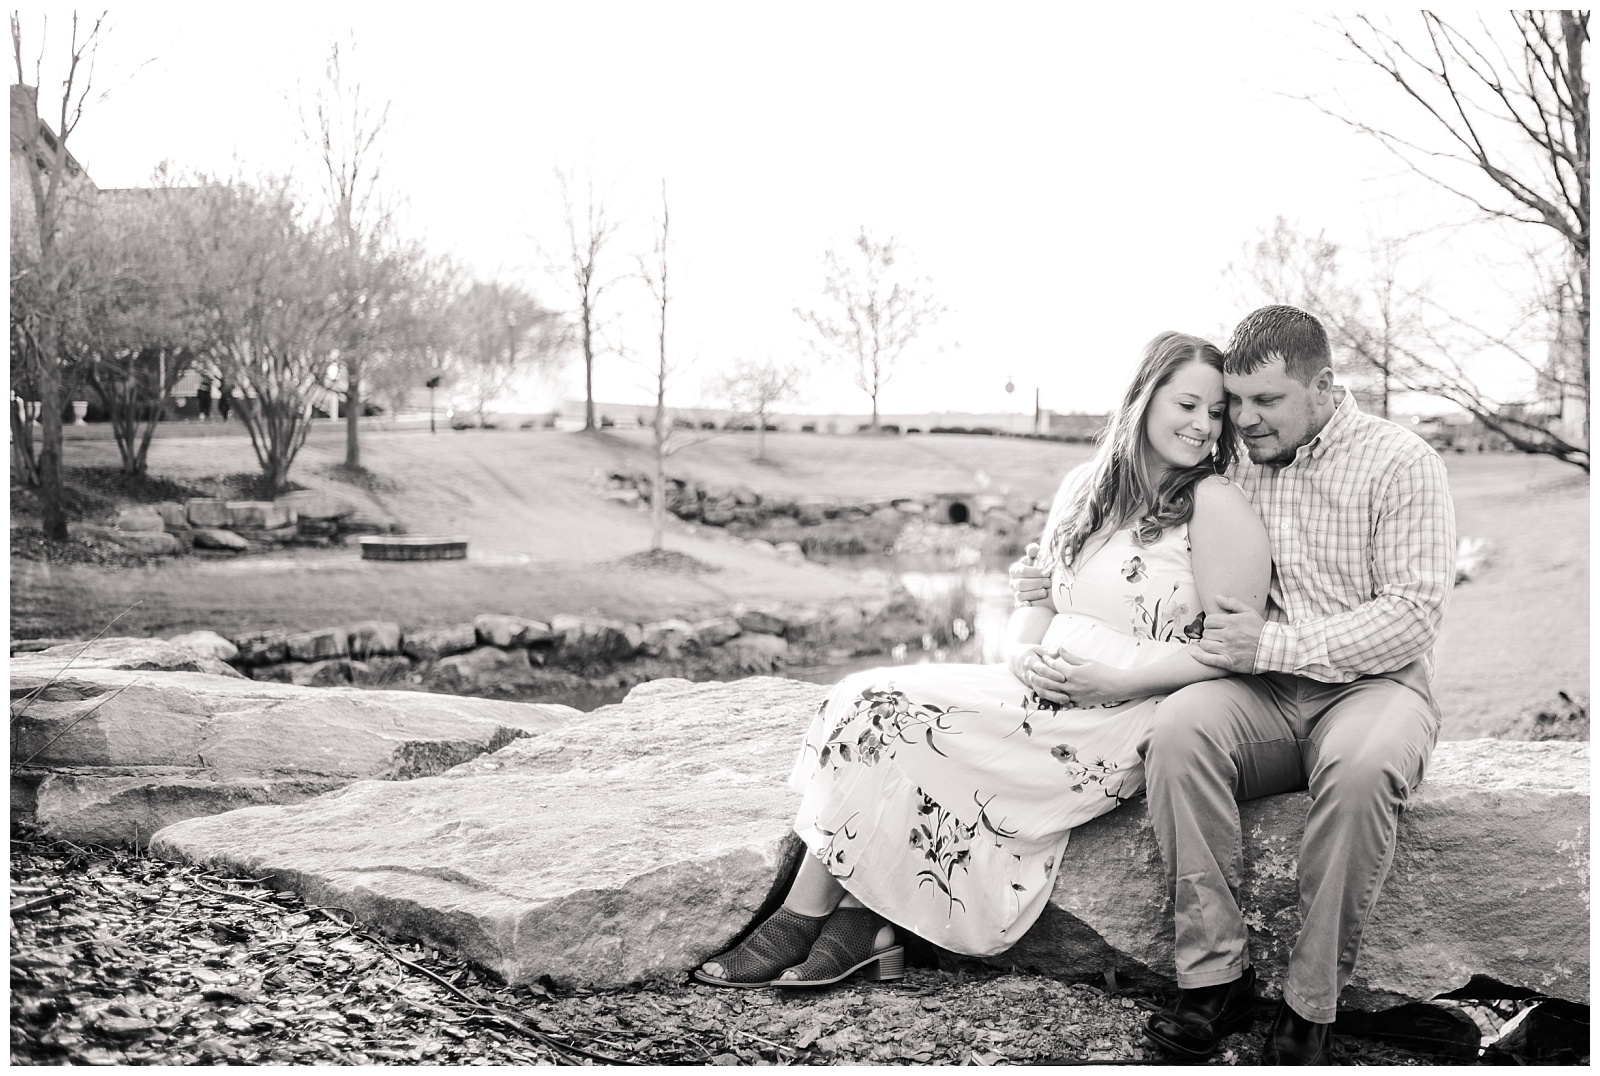 Victoria+Mark Bowling Green Spring Engagement Session